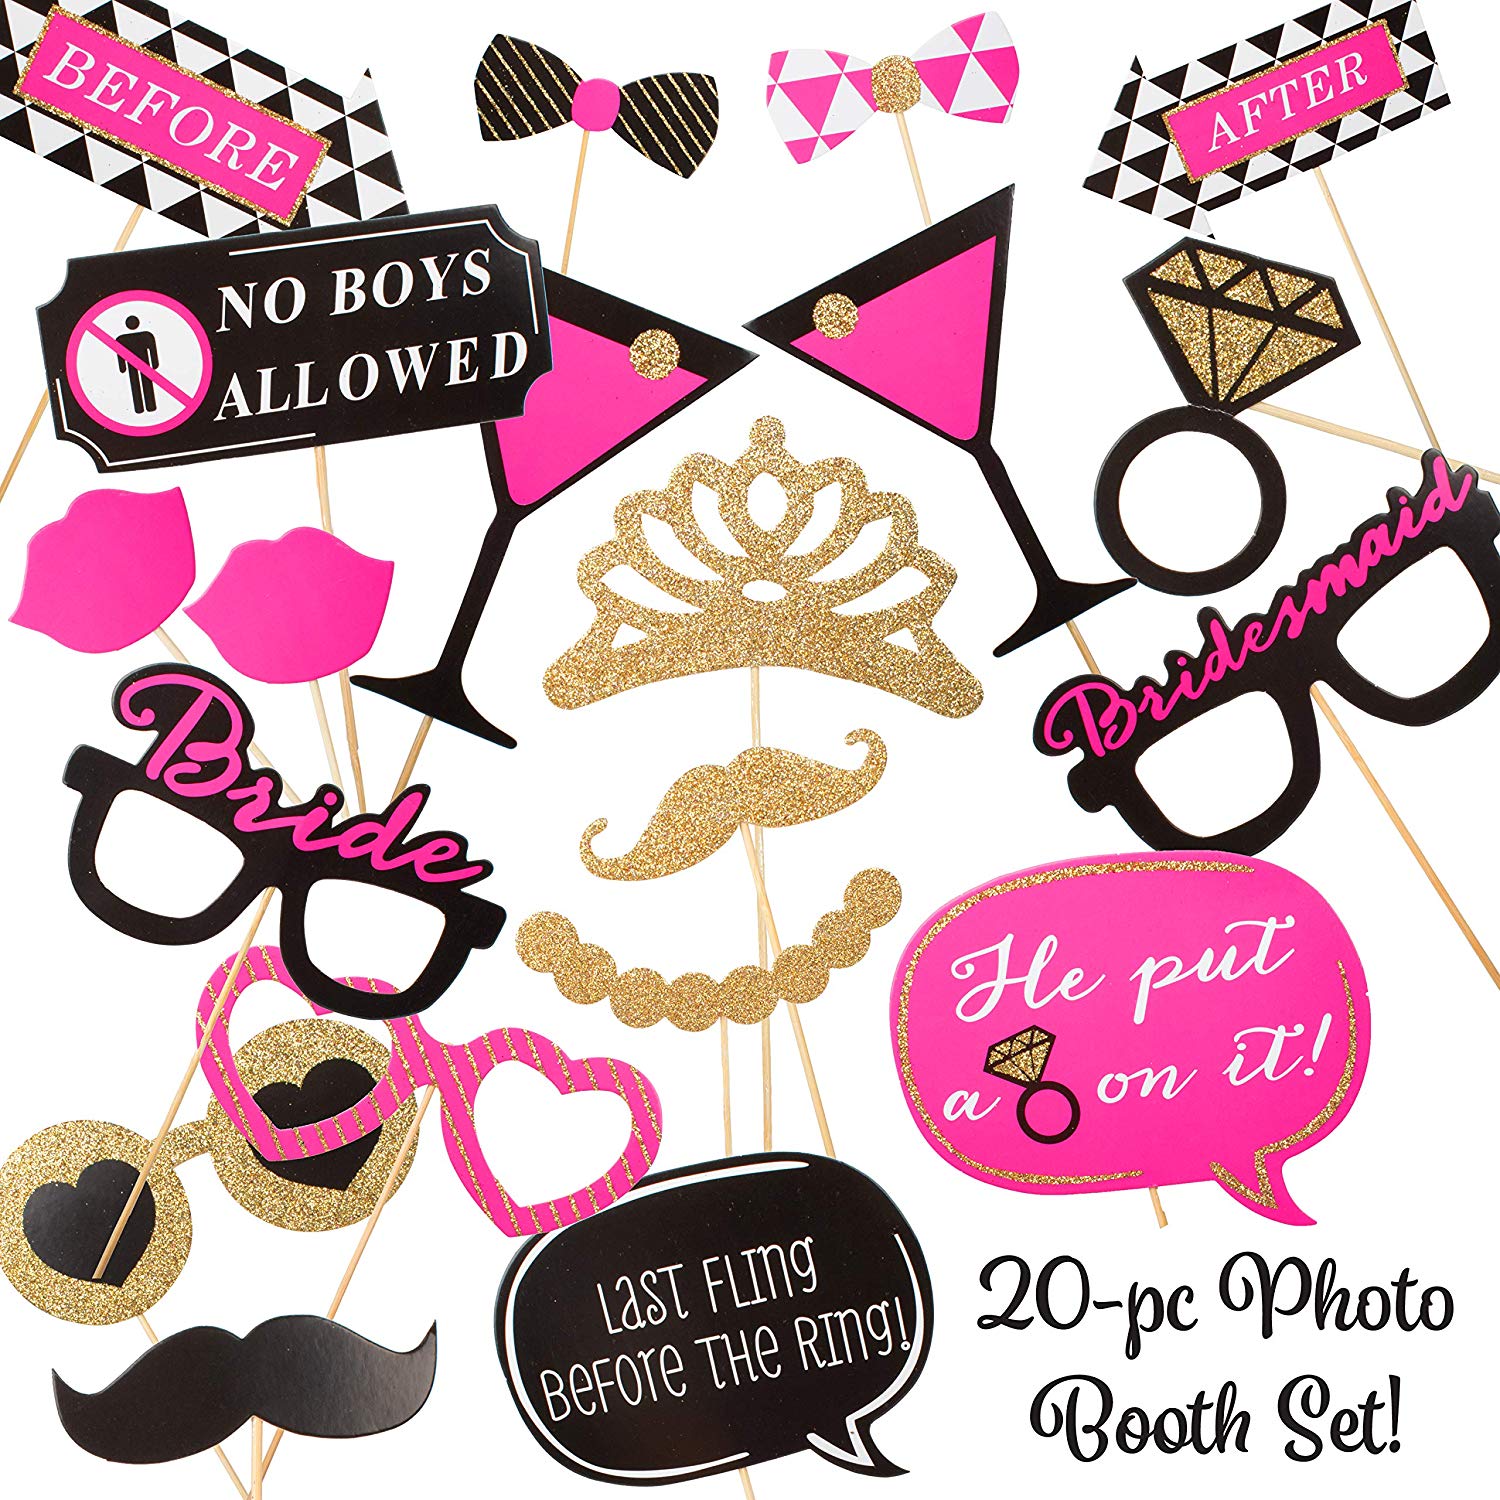 Frisky Toyz Announces New Bachelorette Party Packs For Two Very 